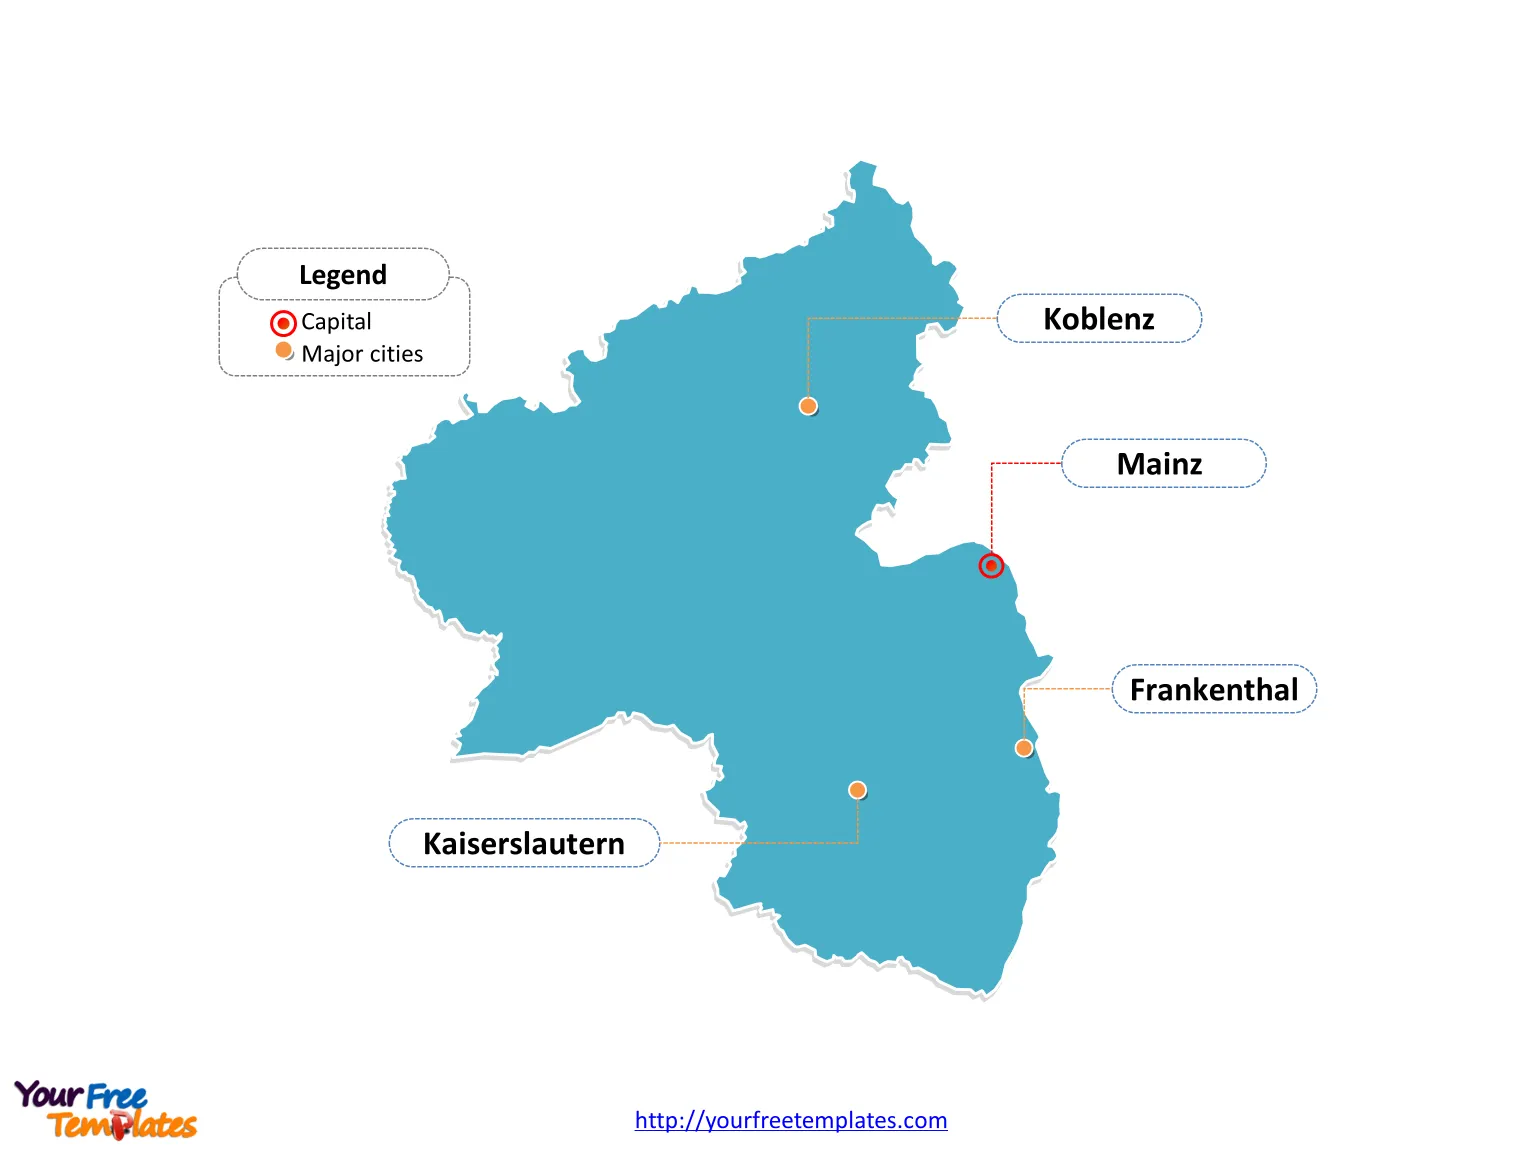 Rhineland-Palatinate map labeled with cities